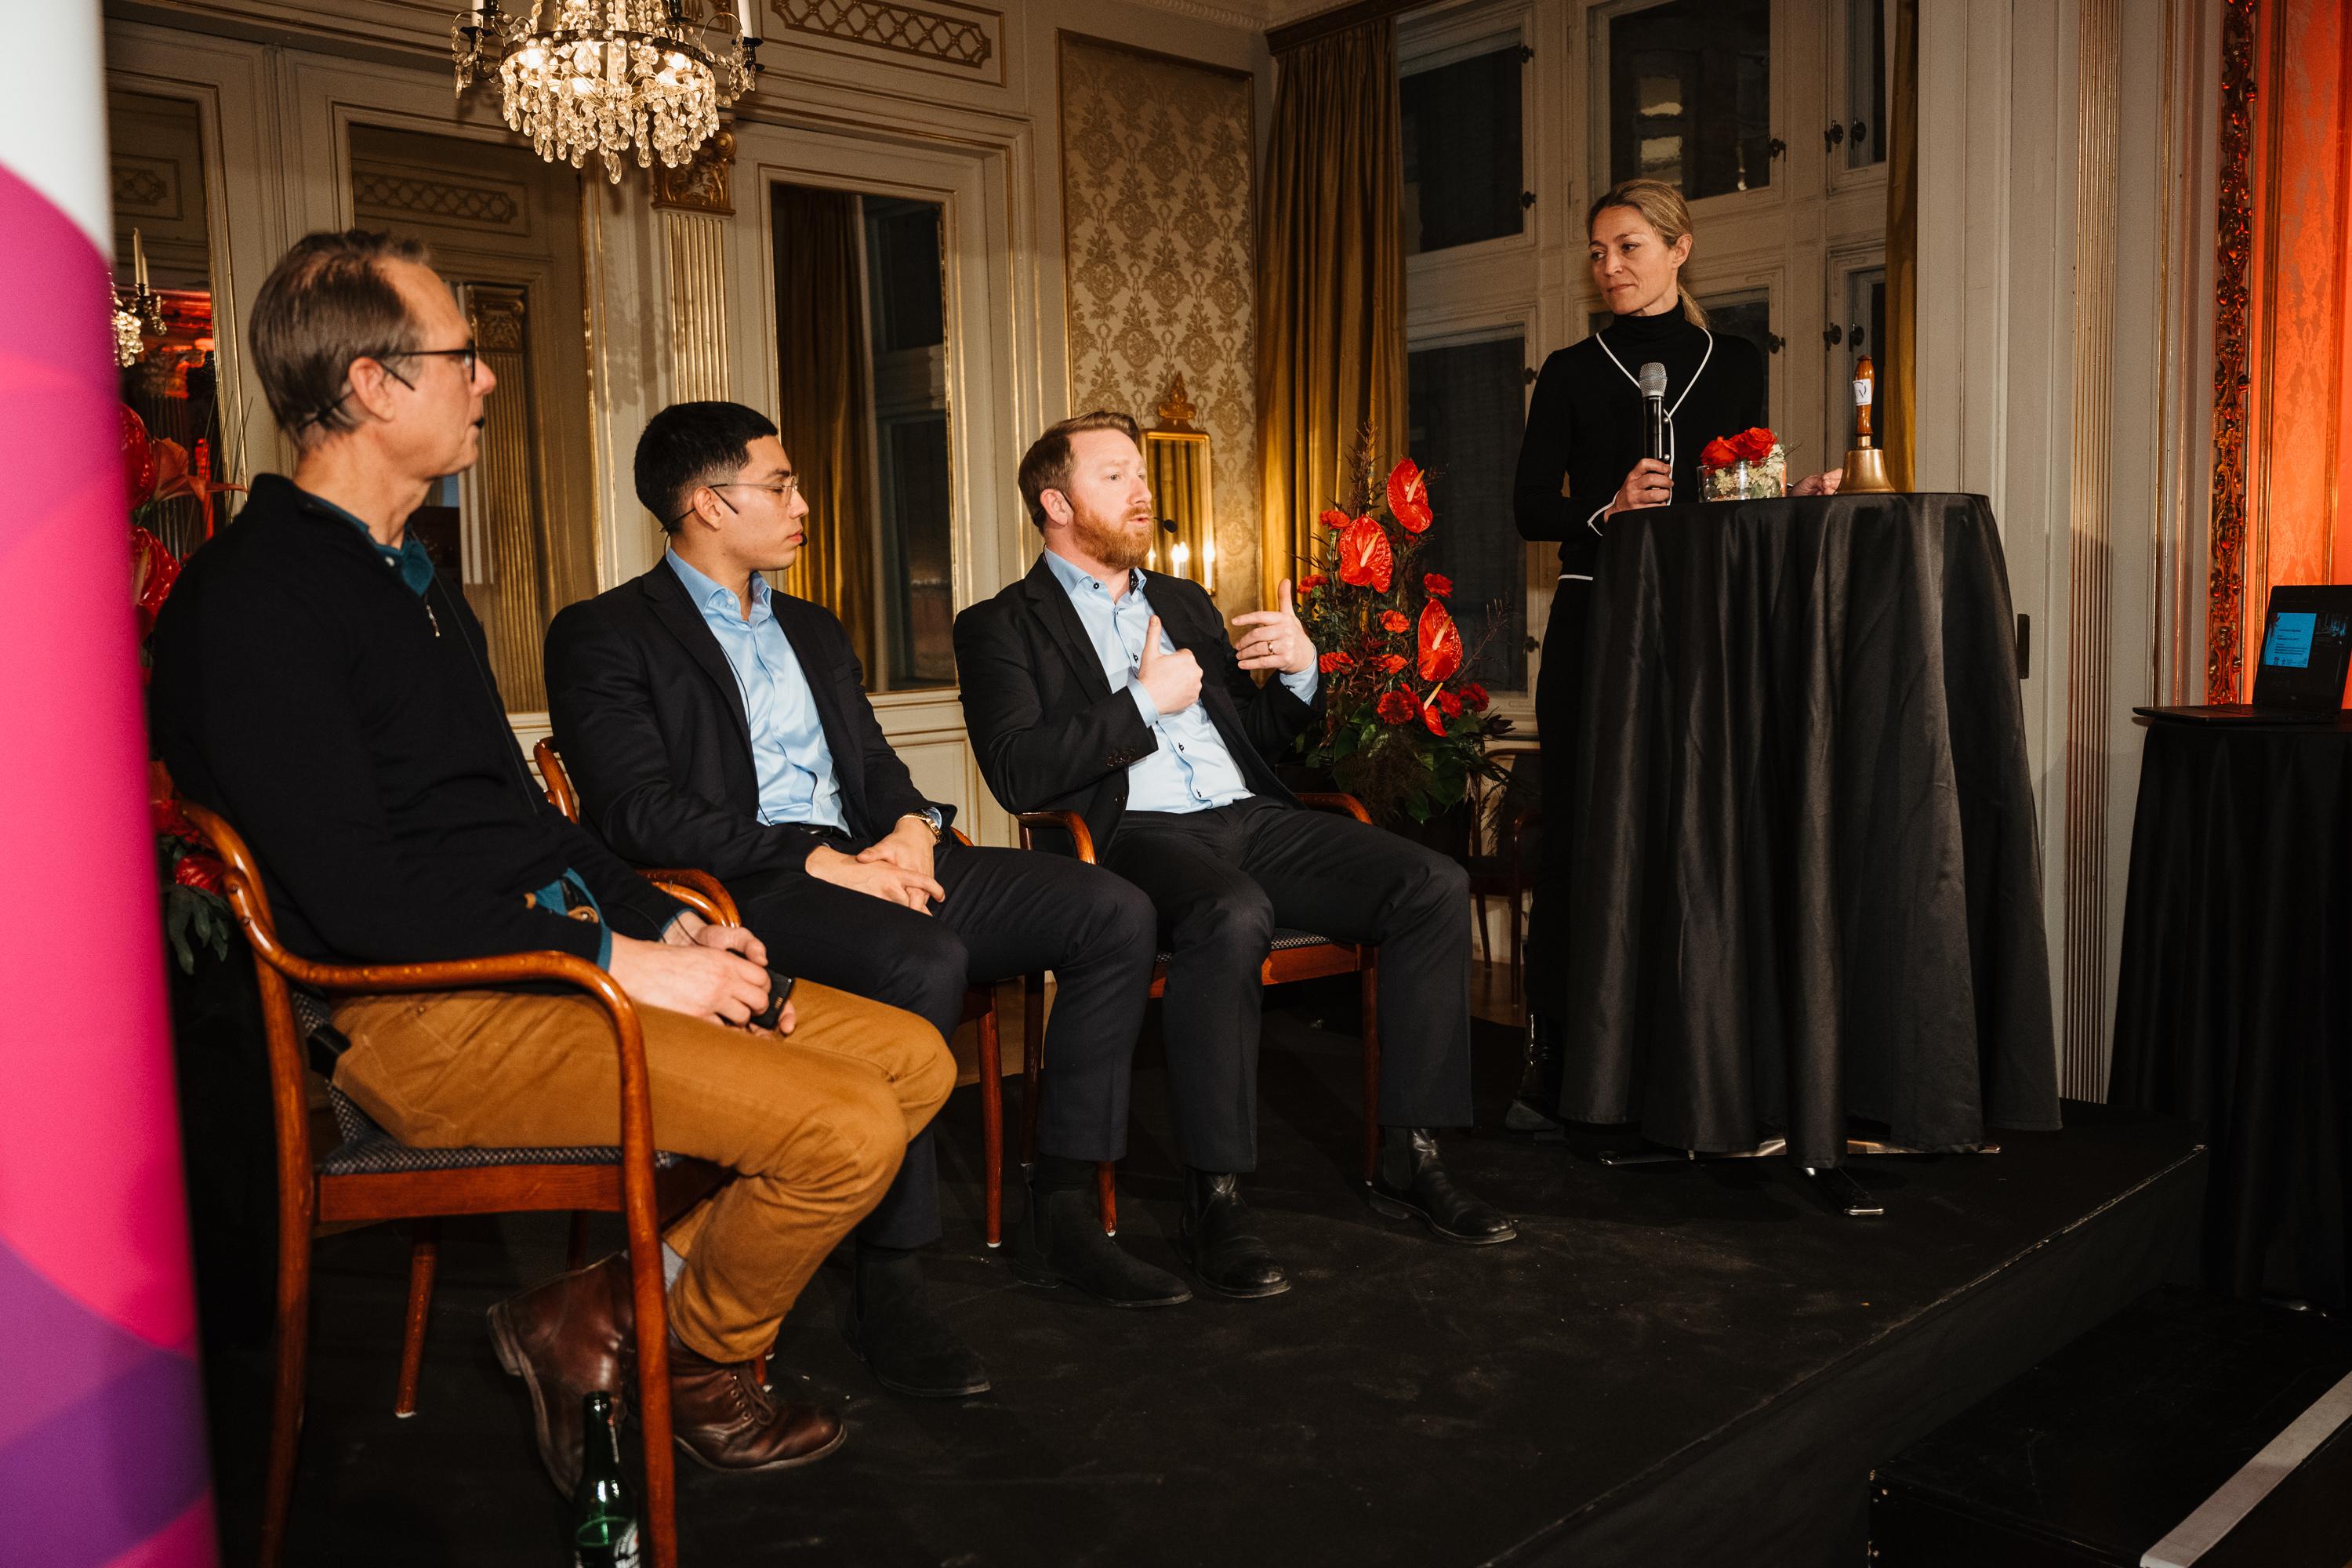 The Hong Kong Economic and Trade Office, London co-hosted receptions in Copenhagen, Denmark, and Stockholm, Sweden, with local business associations on February 7 and 8 respectively for celebrating the Year of the Rabbit. Photo shows the business seminar at the Stockholm reception.